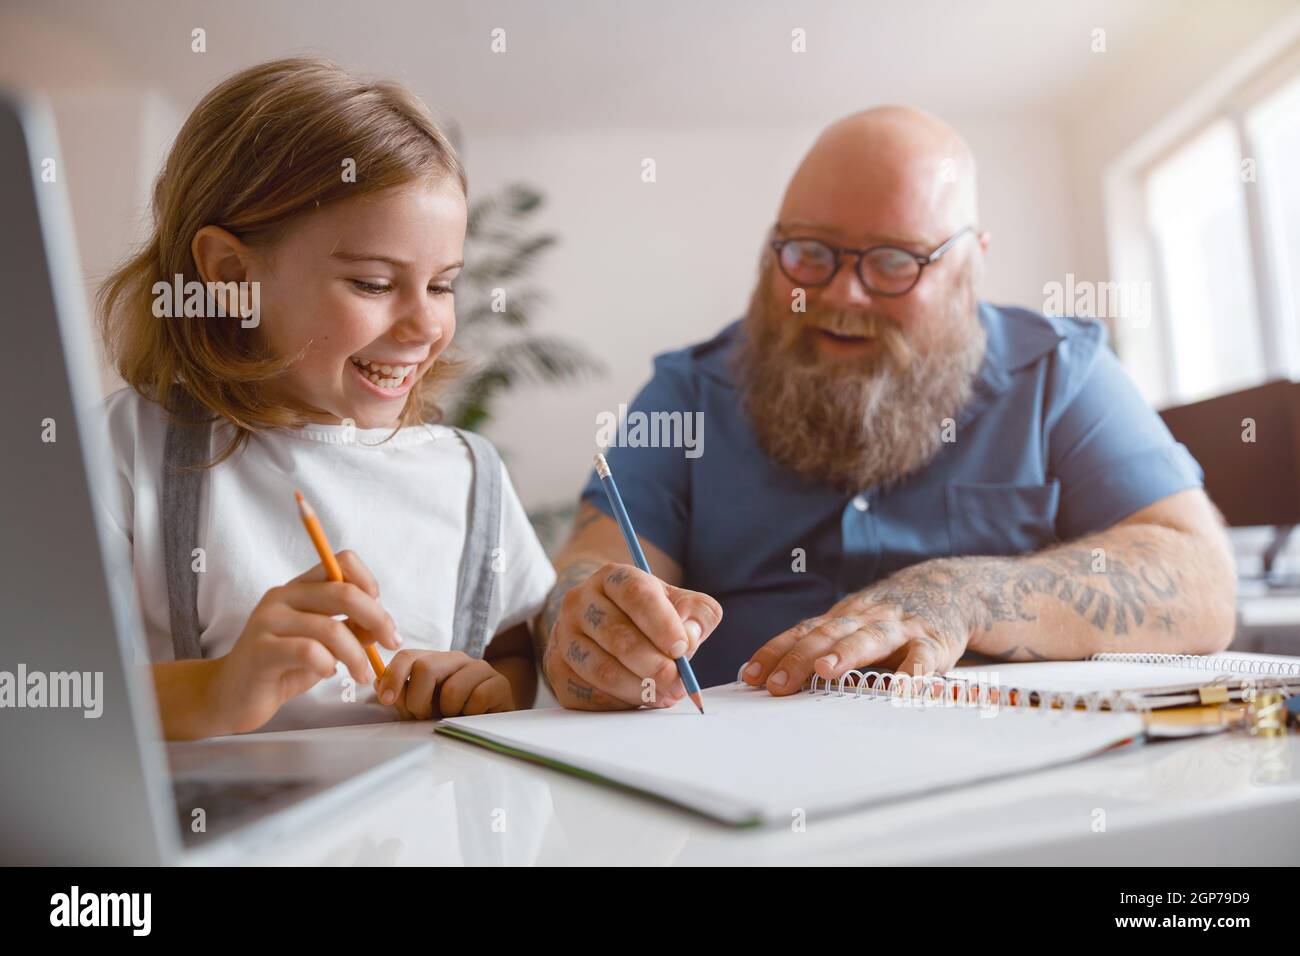 Happy little schoolgirl and father helping her to do homework at table in room Stock Photo